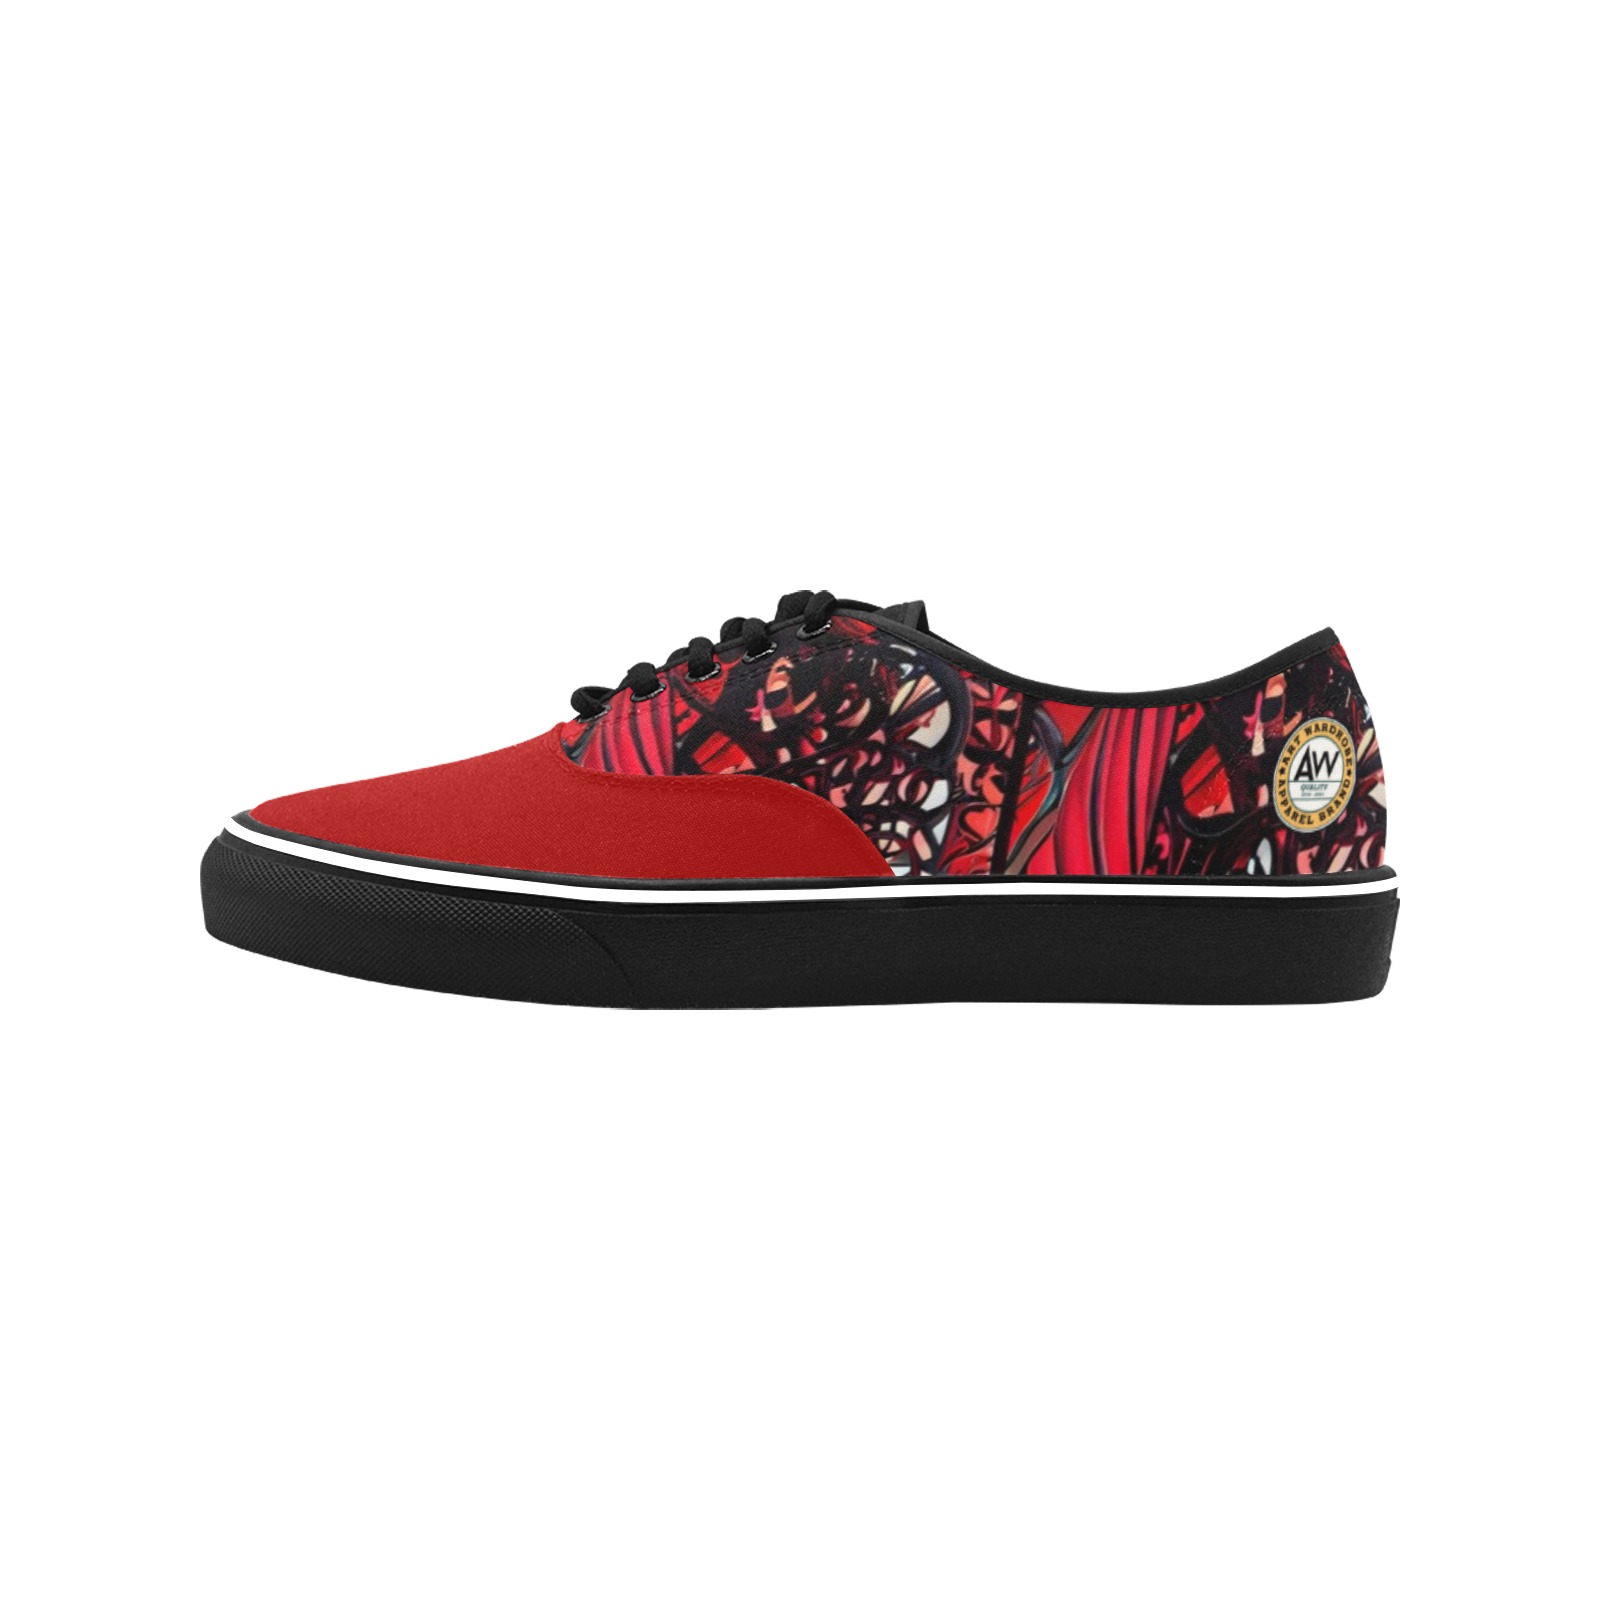 red and black intricate pattern 1 Classic Women's Canvas Low Top Shoes (Model E001-4)